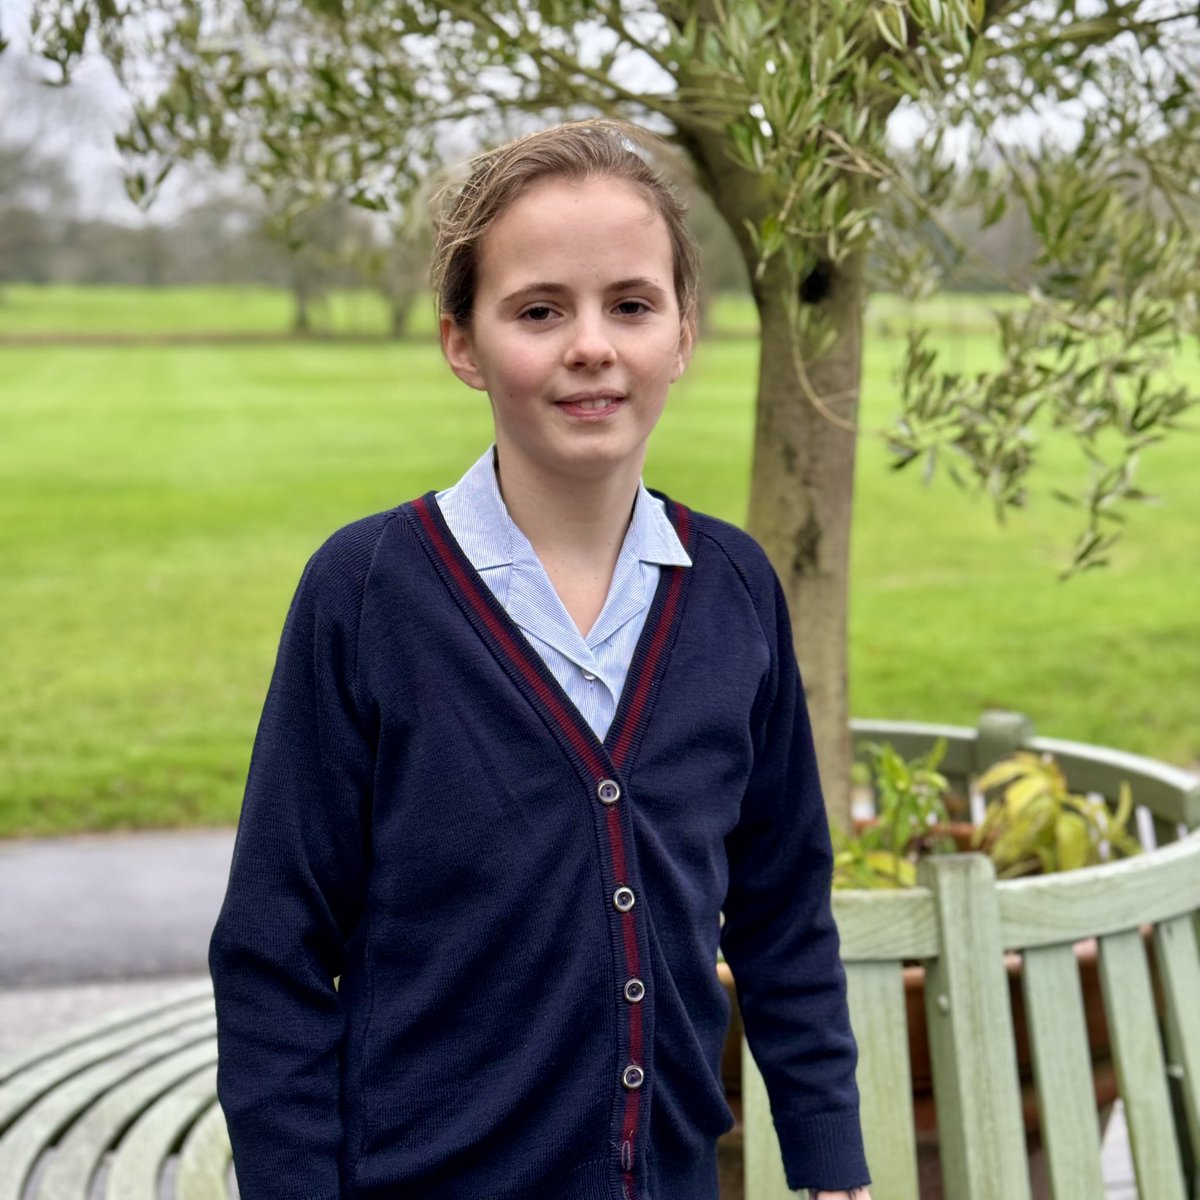 Congratulations to Tabitha, who has been awarded an Academic Scholarship to @WellingtonUK. “I am delighted for Tabitha, who did exceptionally well across the board in her scholarship exams,” says Deputy Head Academic, Mrs Lonergan.Well done, Tabitha. #portregis #scholarships